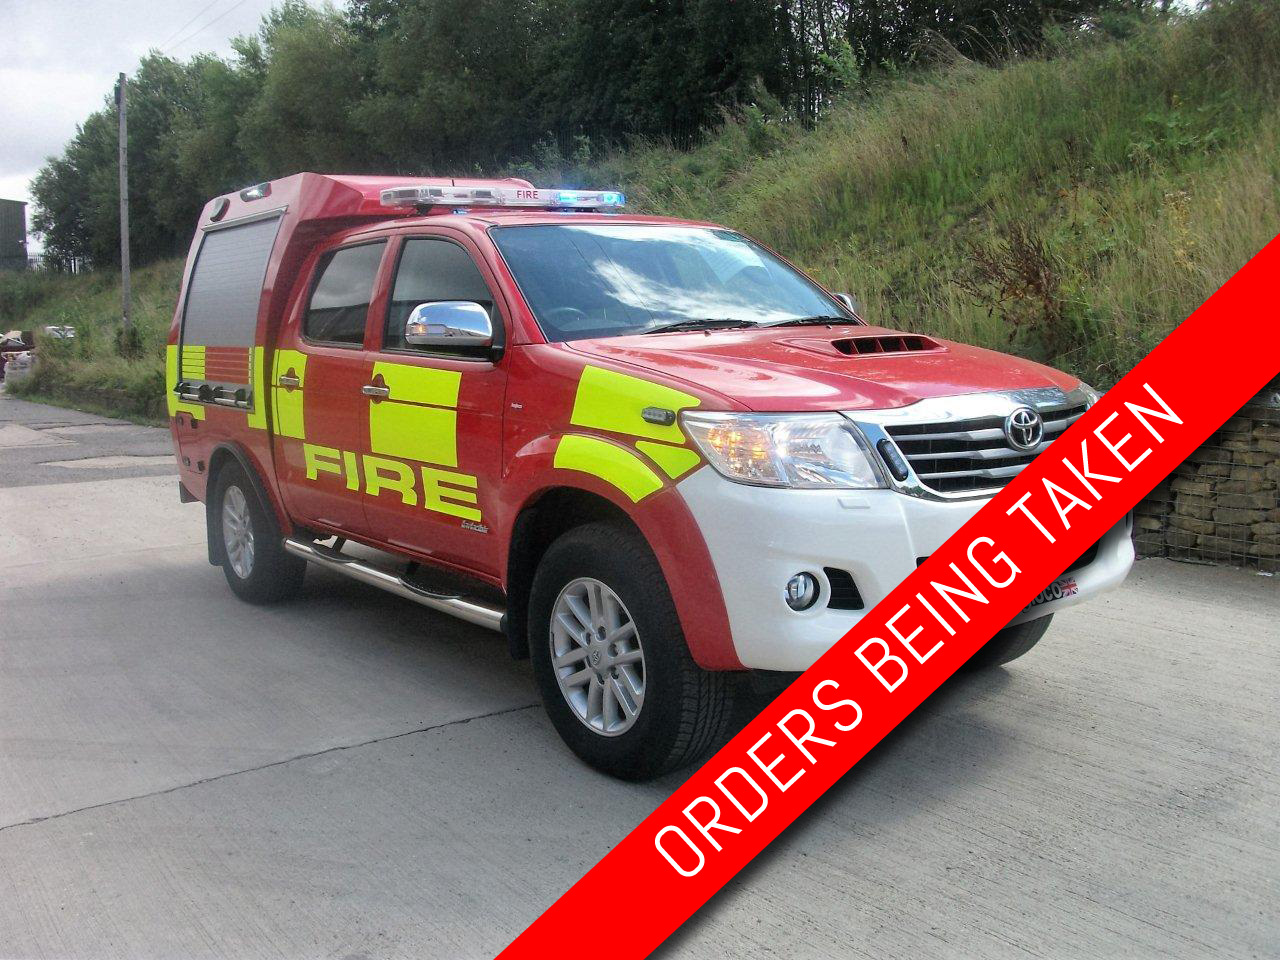 2014 Toyota Hilux RIV - Evems Limited - Good quality fire engines for sale